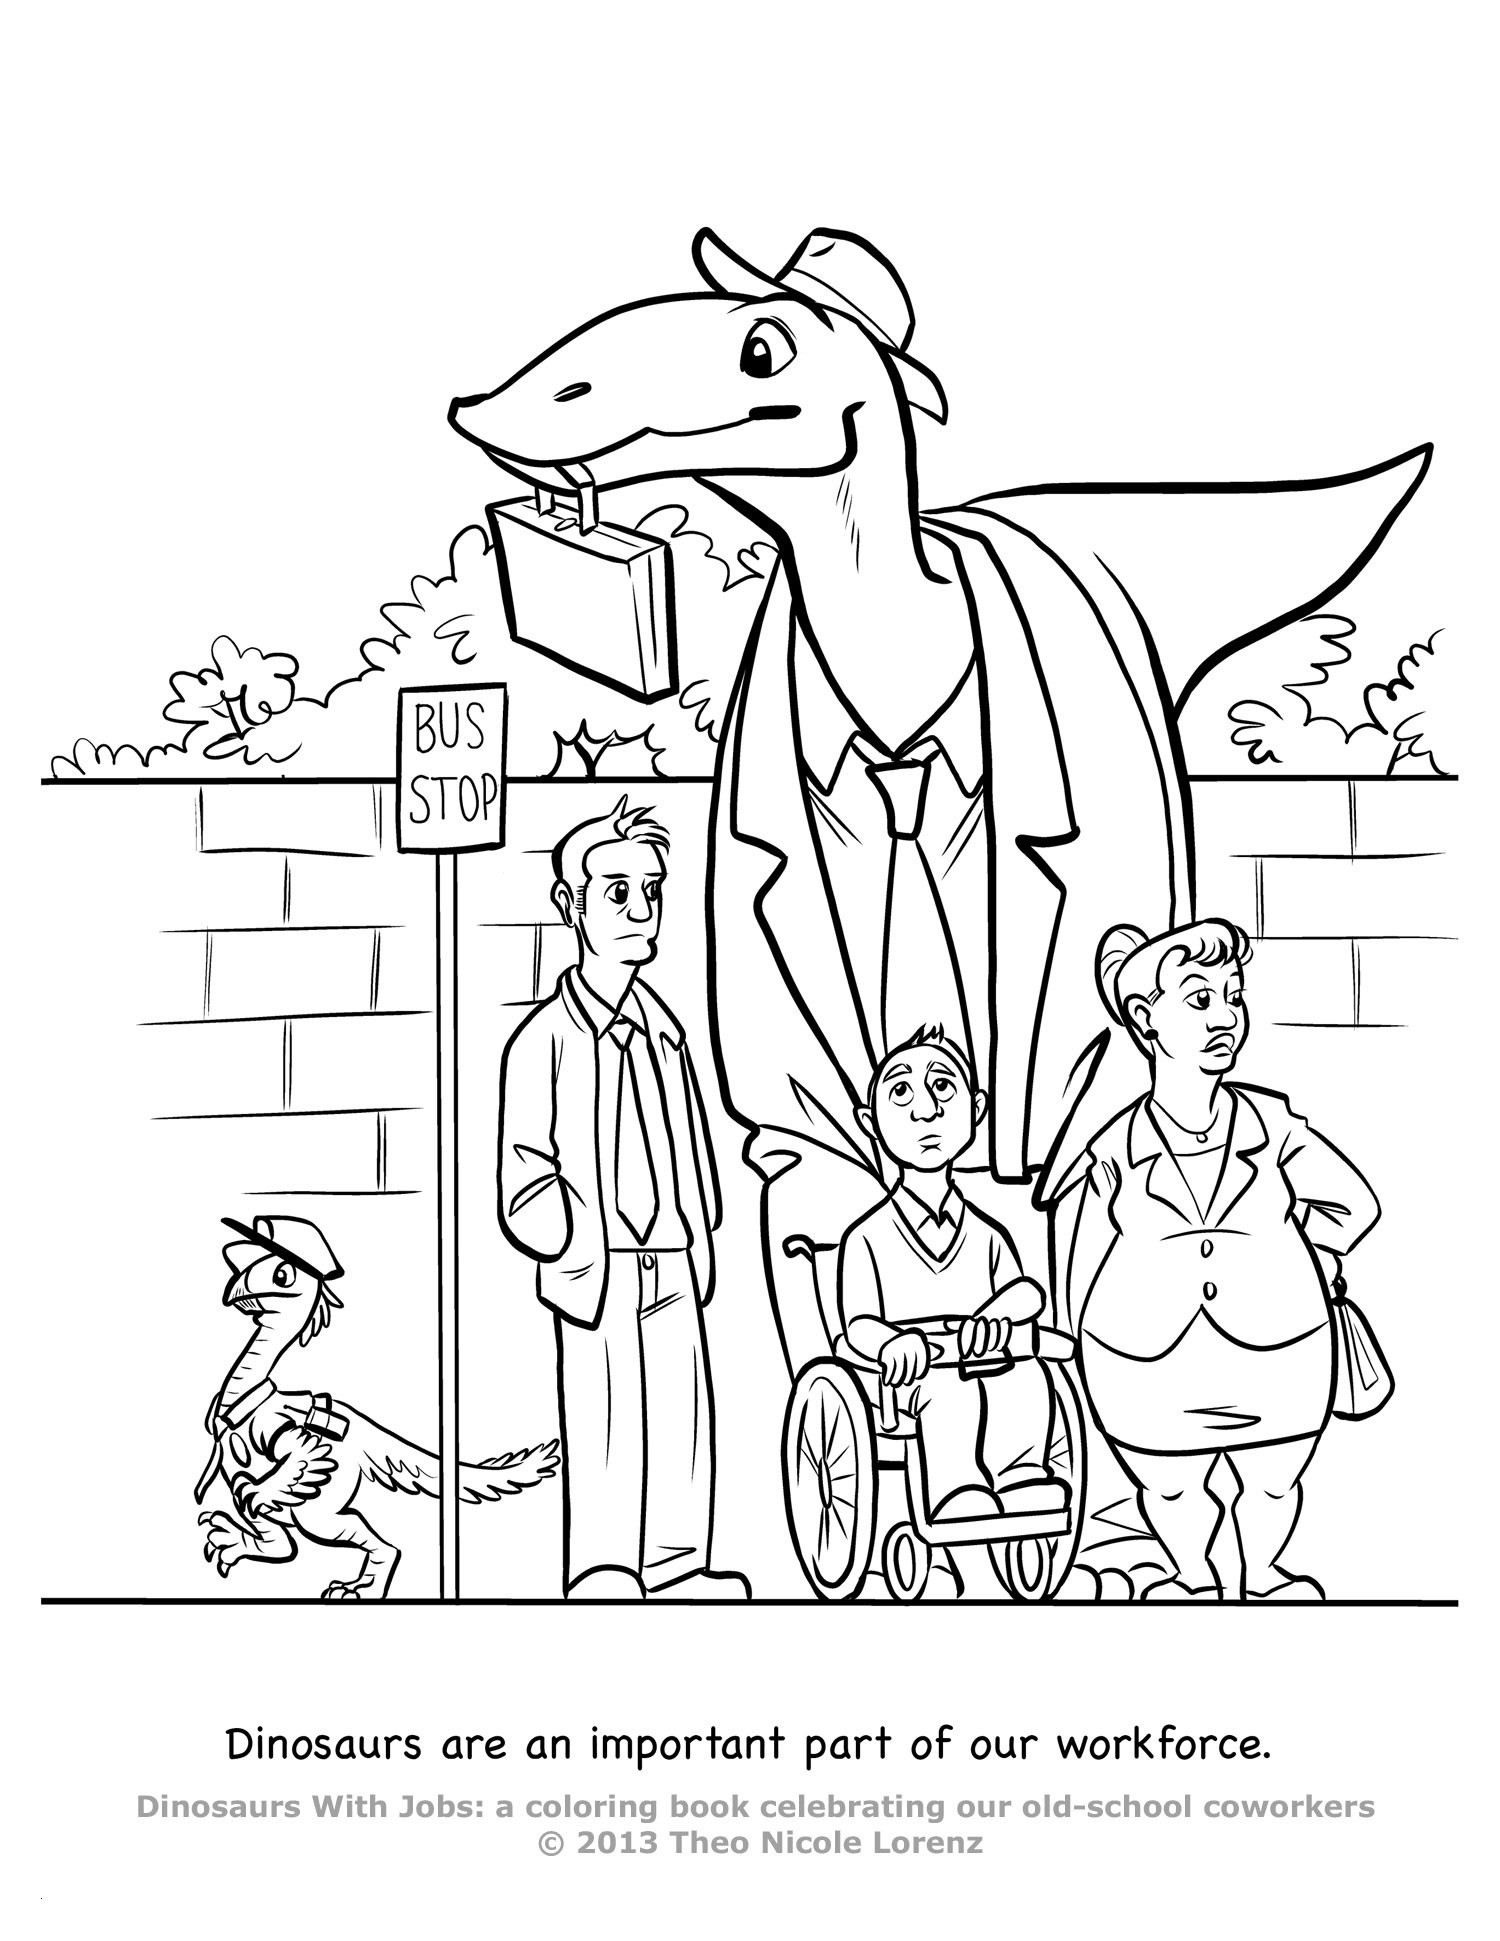 Dinosaurs with Jobs Coloring Book Wallpaper